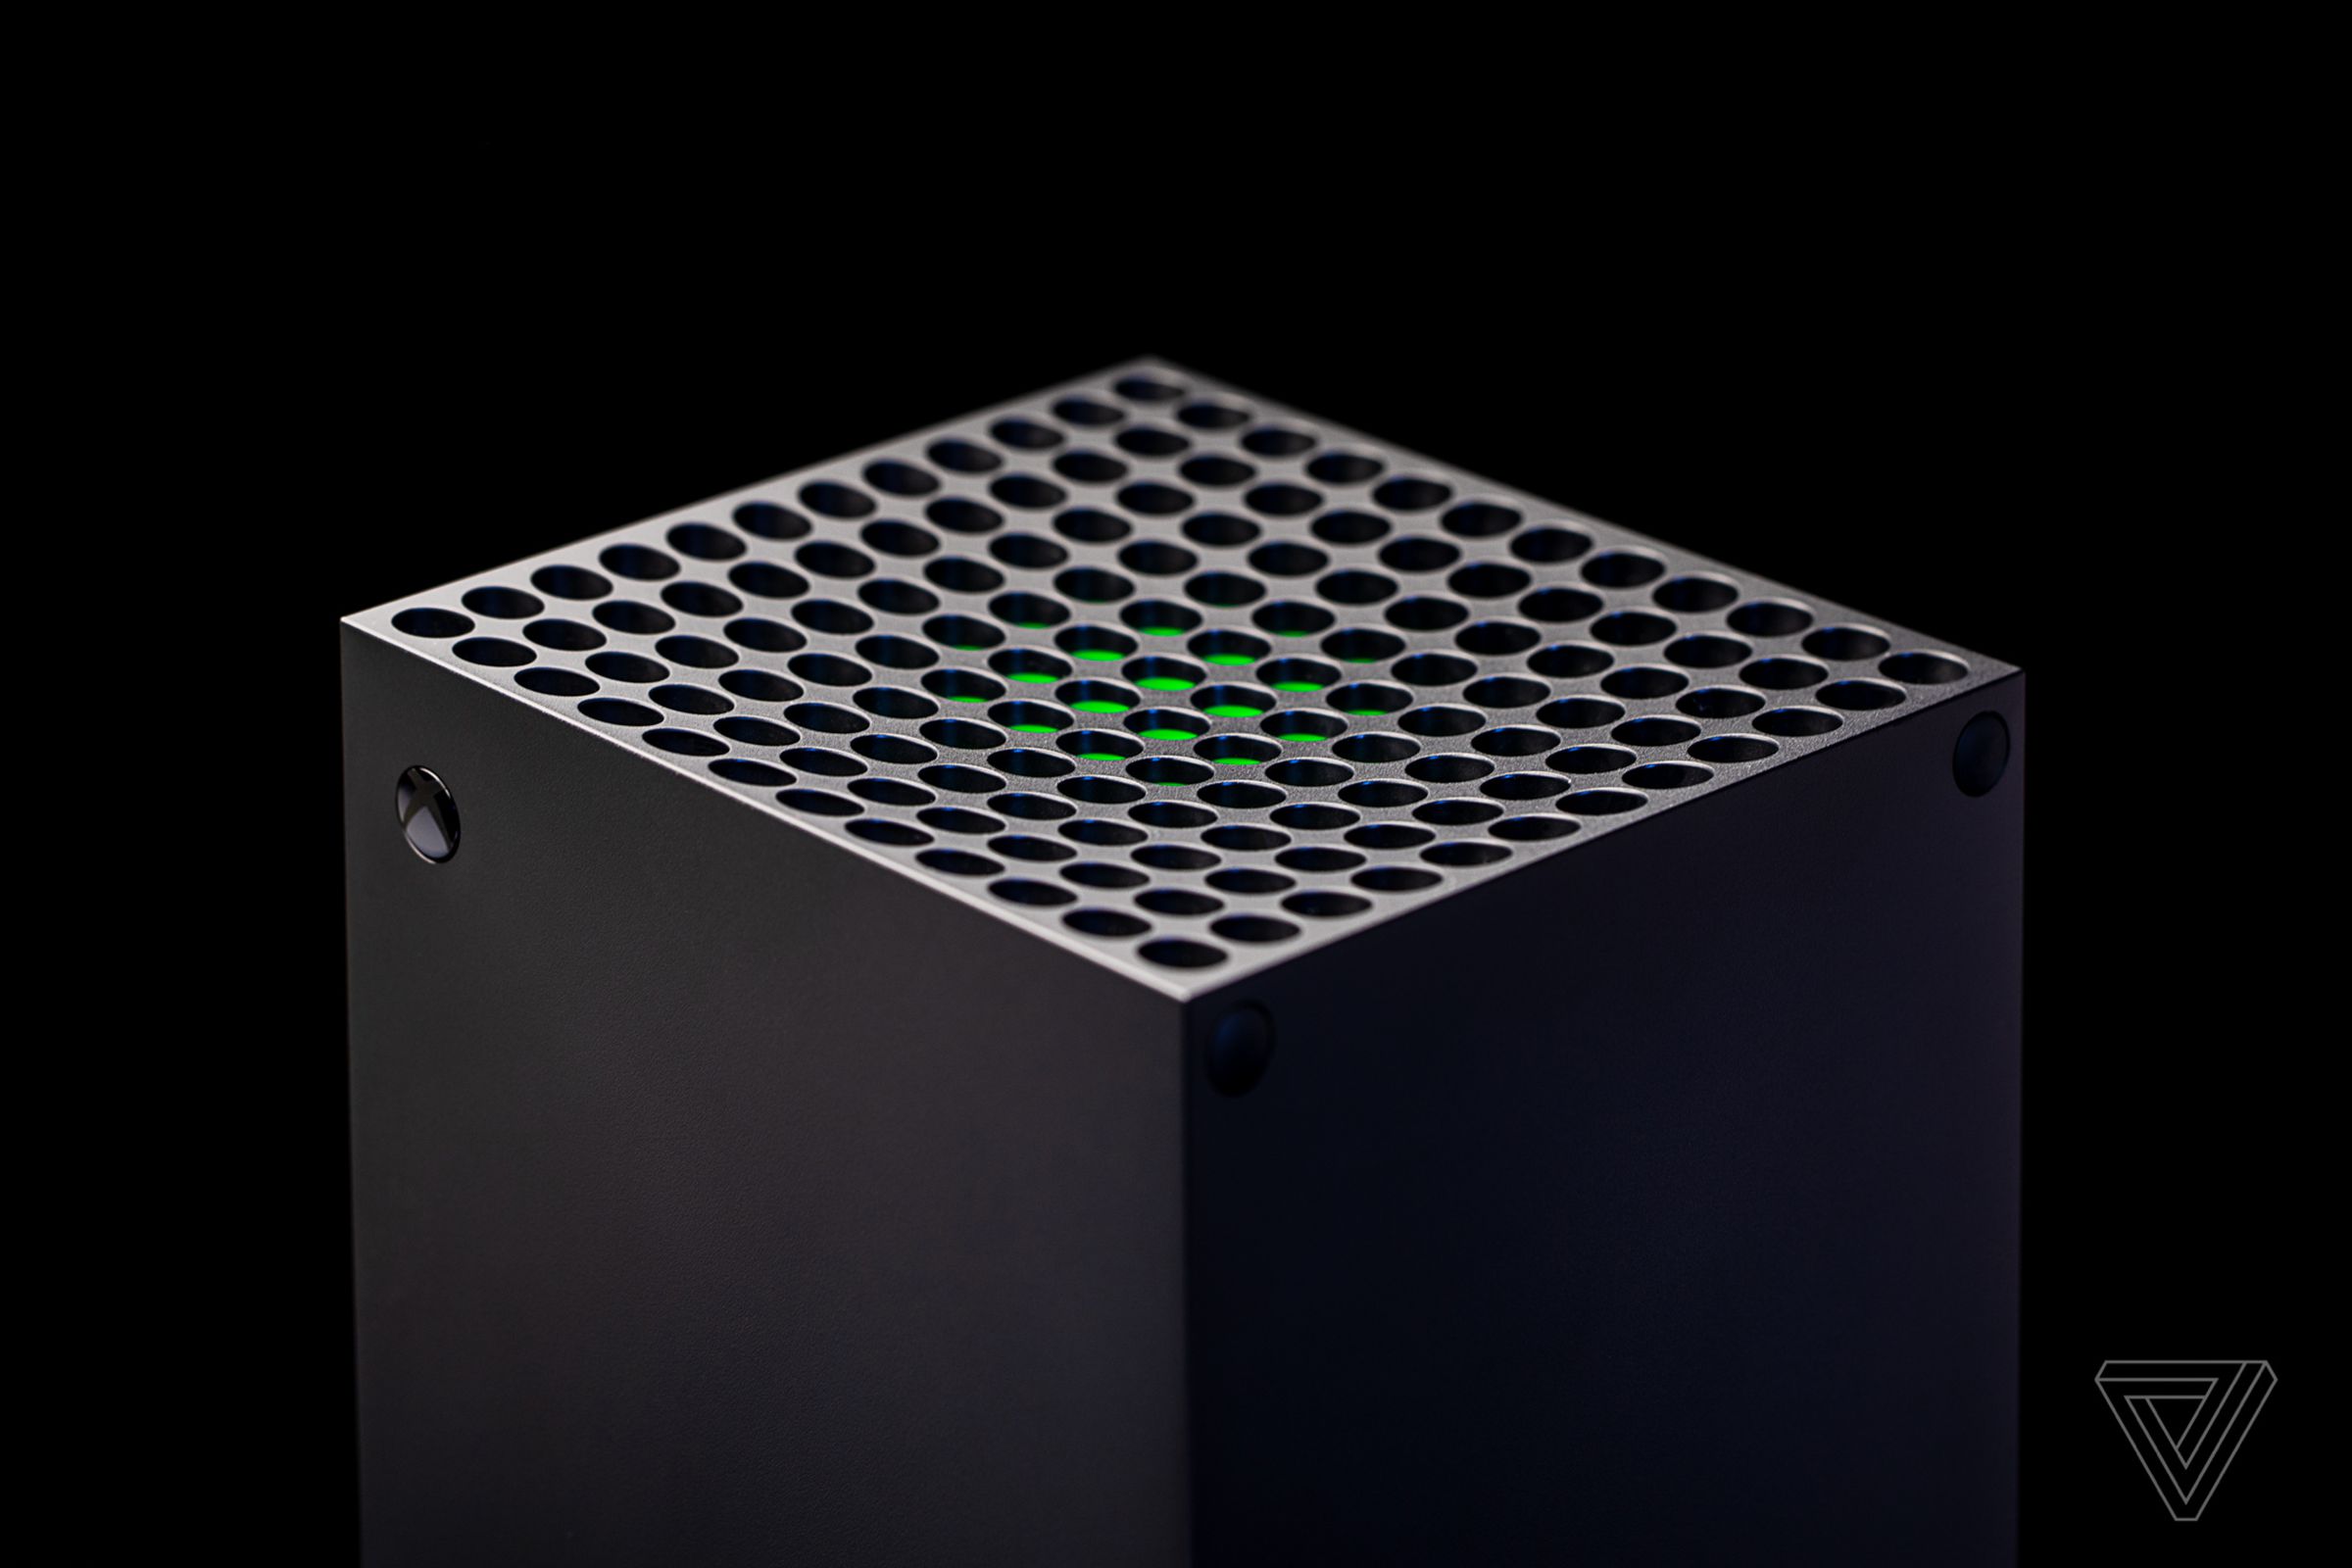 The upper part of the Xbox Series X placed against a black background.